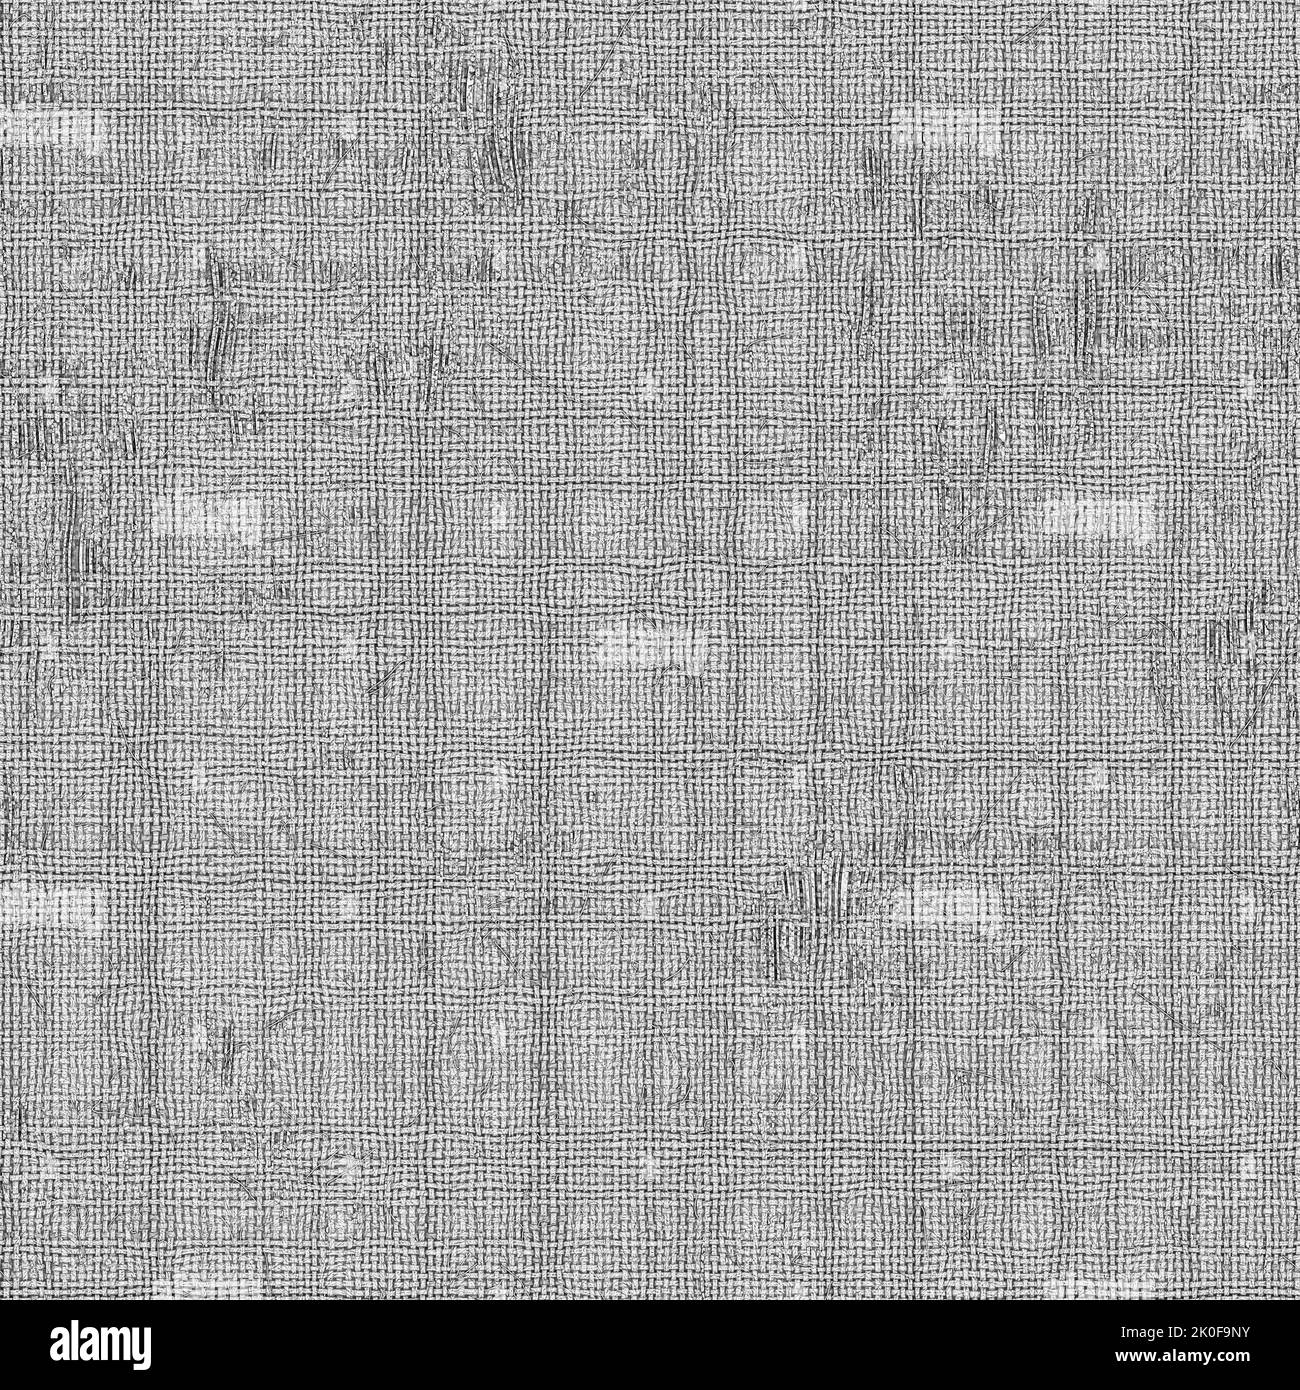 Ambient Occlusion map fabric, fabric AO mapping Stock Photo